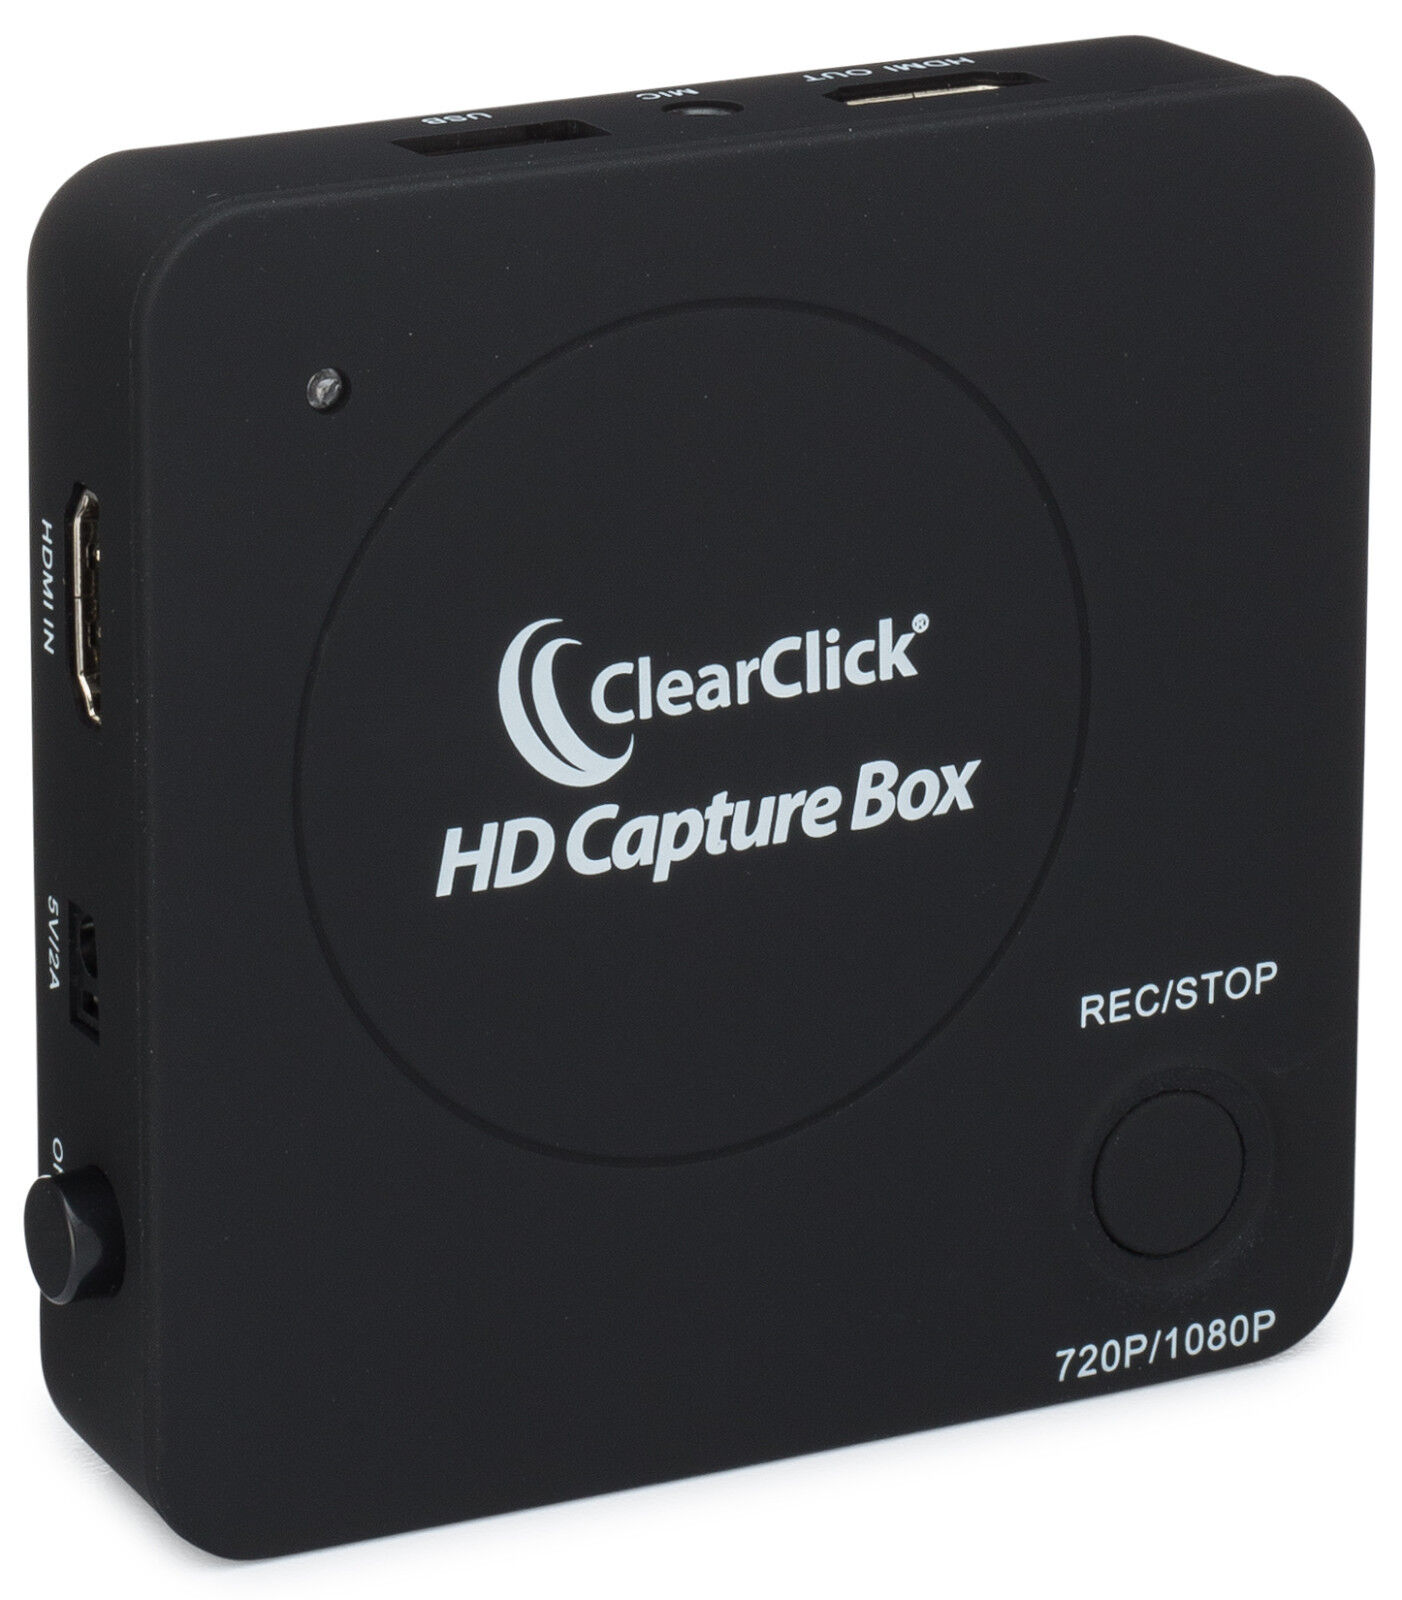 ClearClick HD Capture Box - Record Capture HDMI Video From Gaming Systems & More